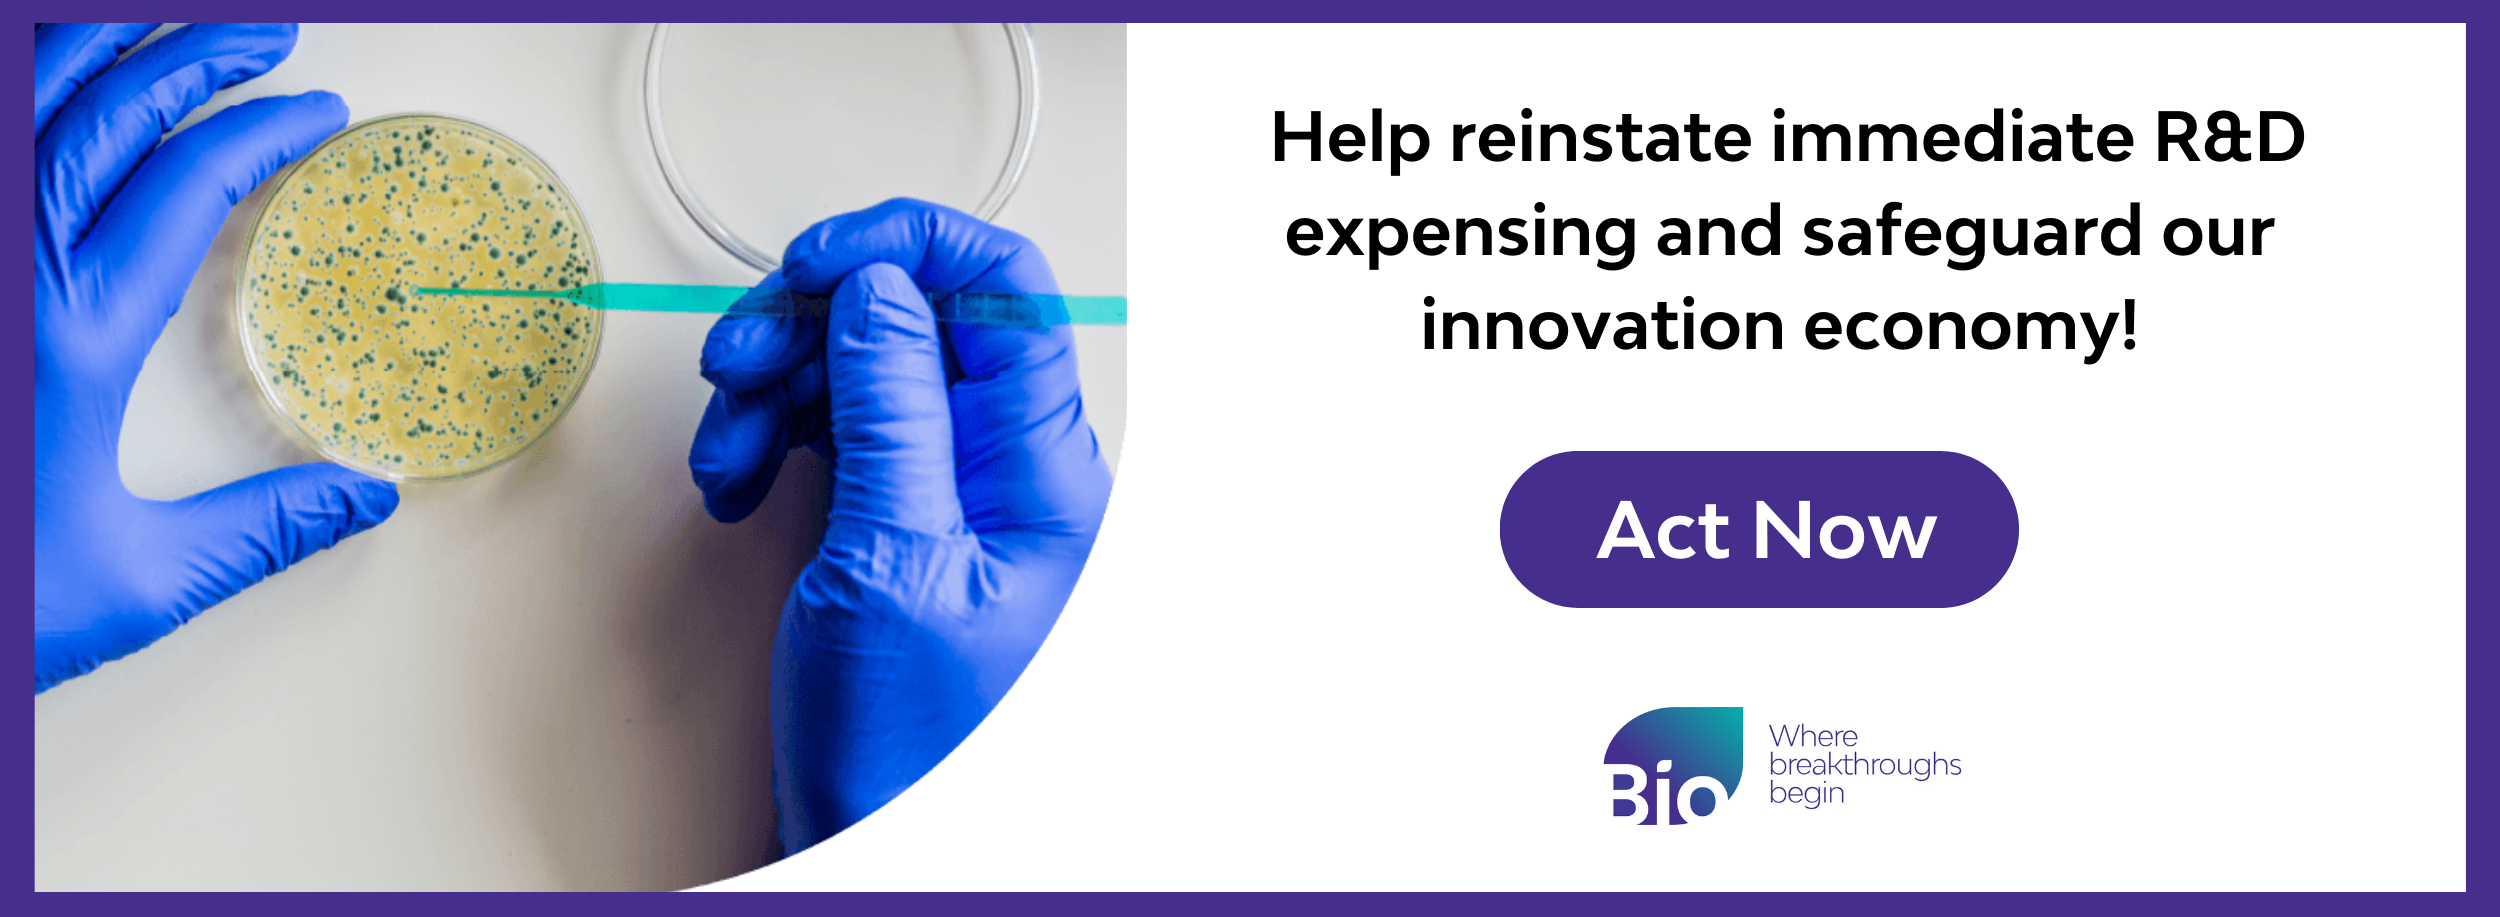 Take action to reinstate R&D expensing and safeguard innovation.